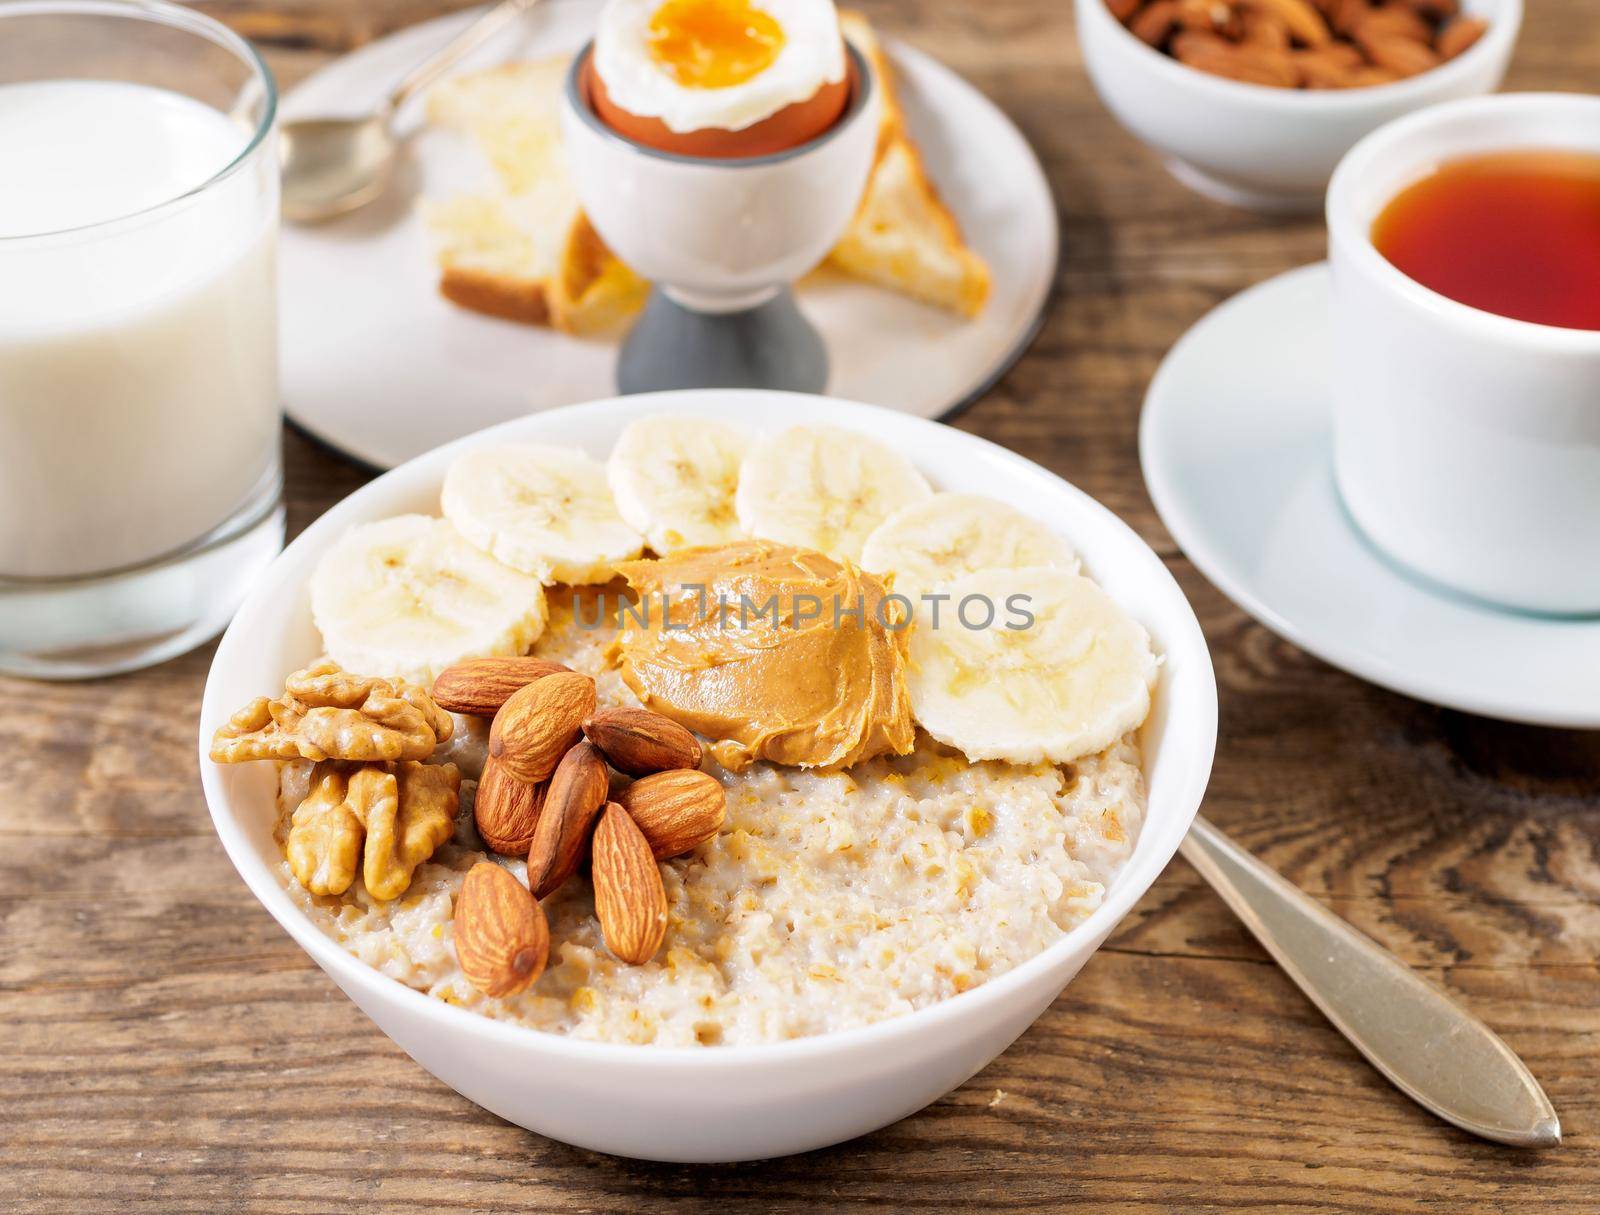 healthy breakfast - oatmeal with nuts, soft boiled eggs, selective focus, side view, close up